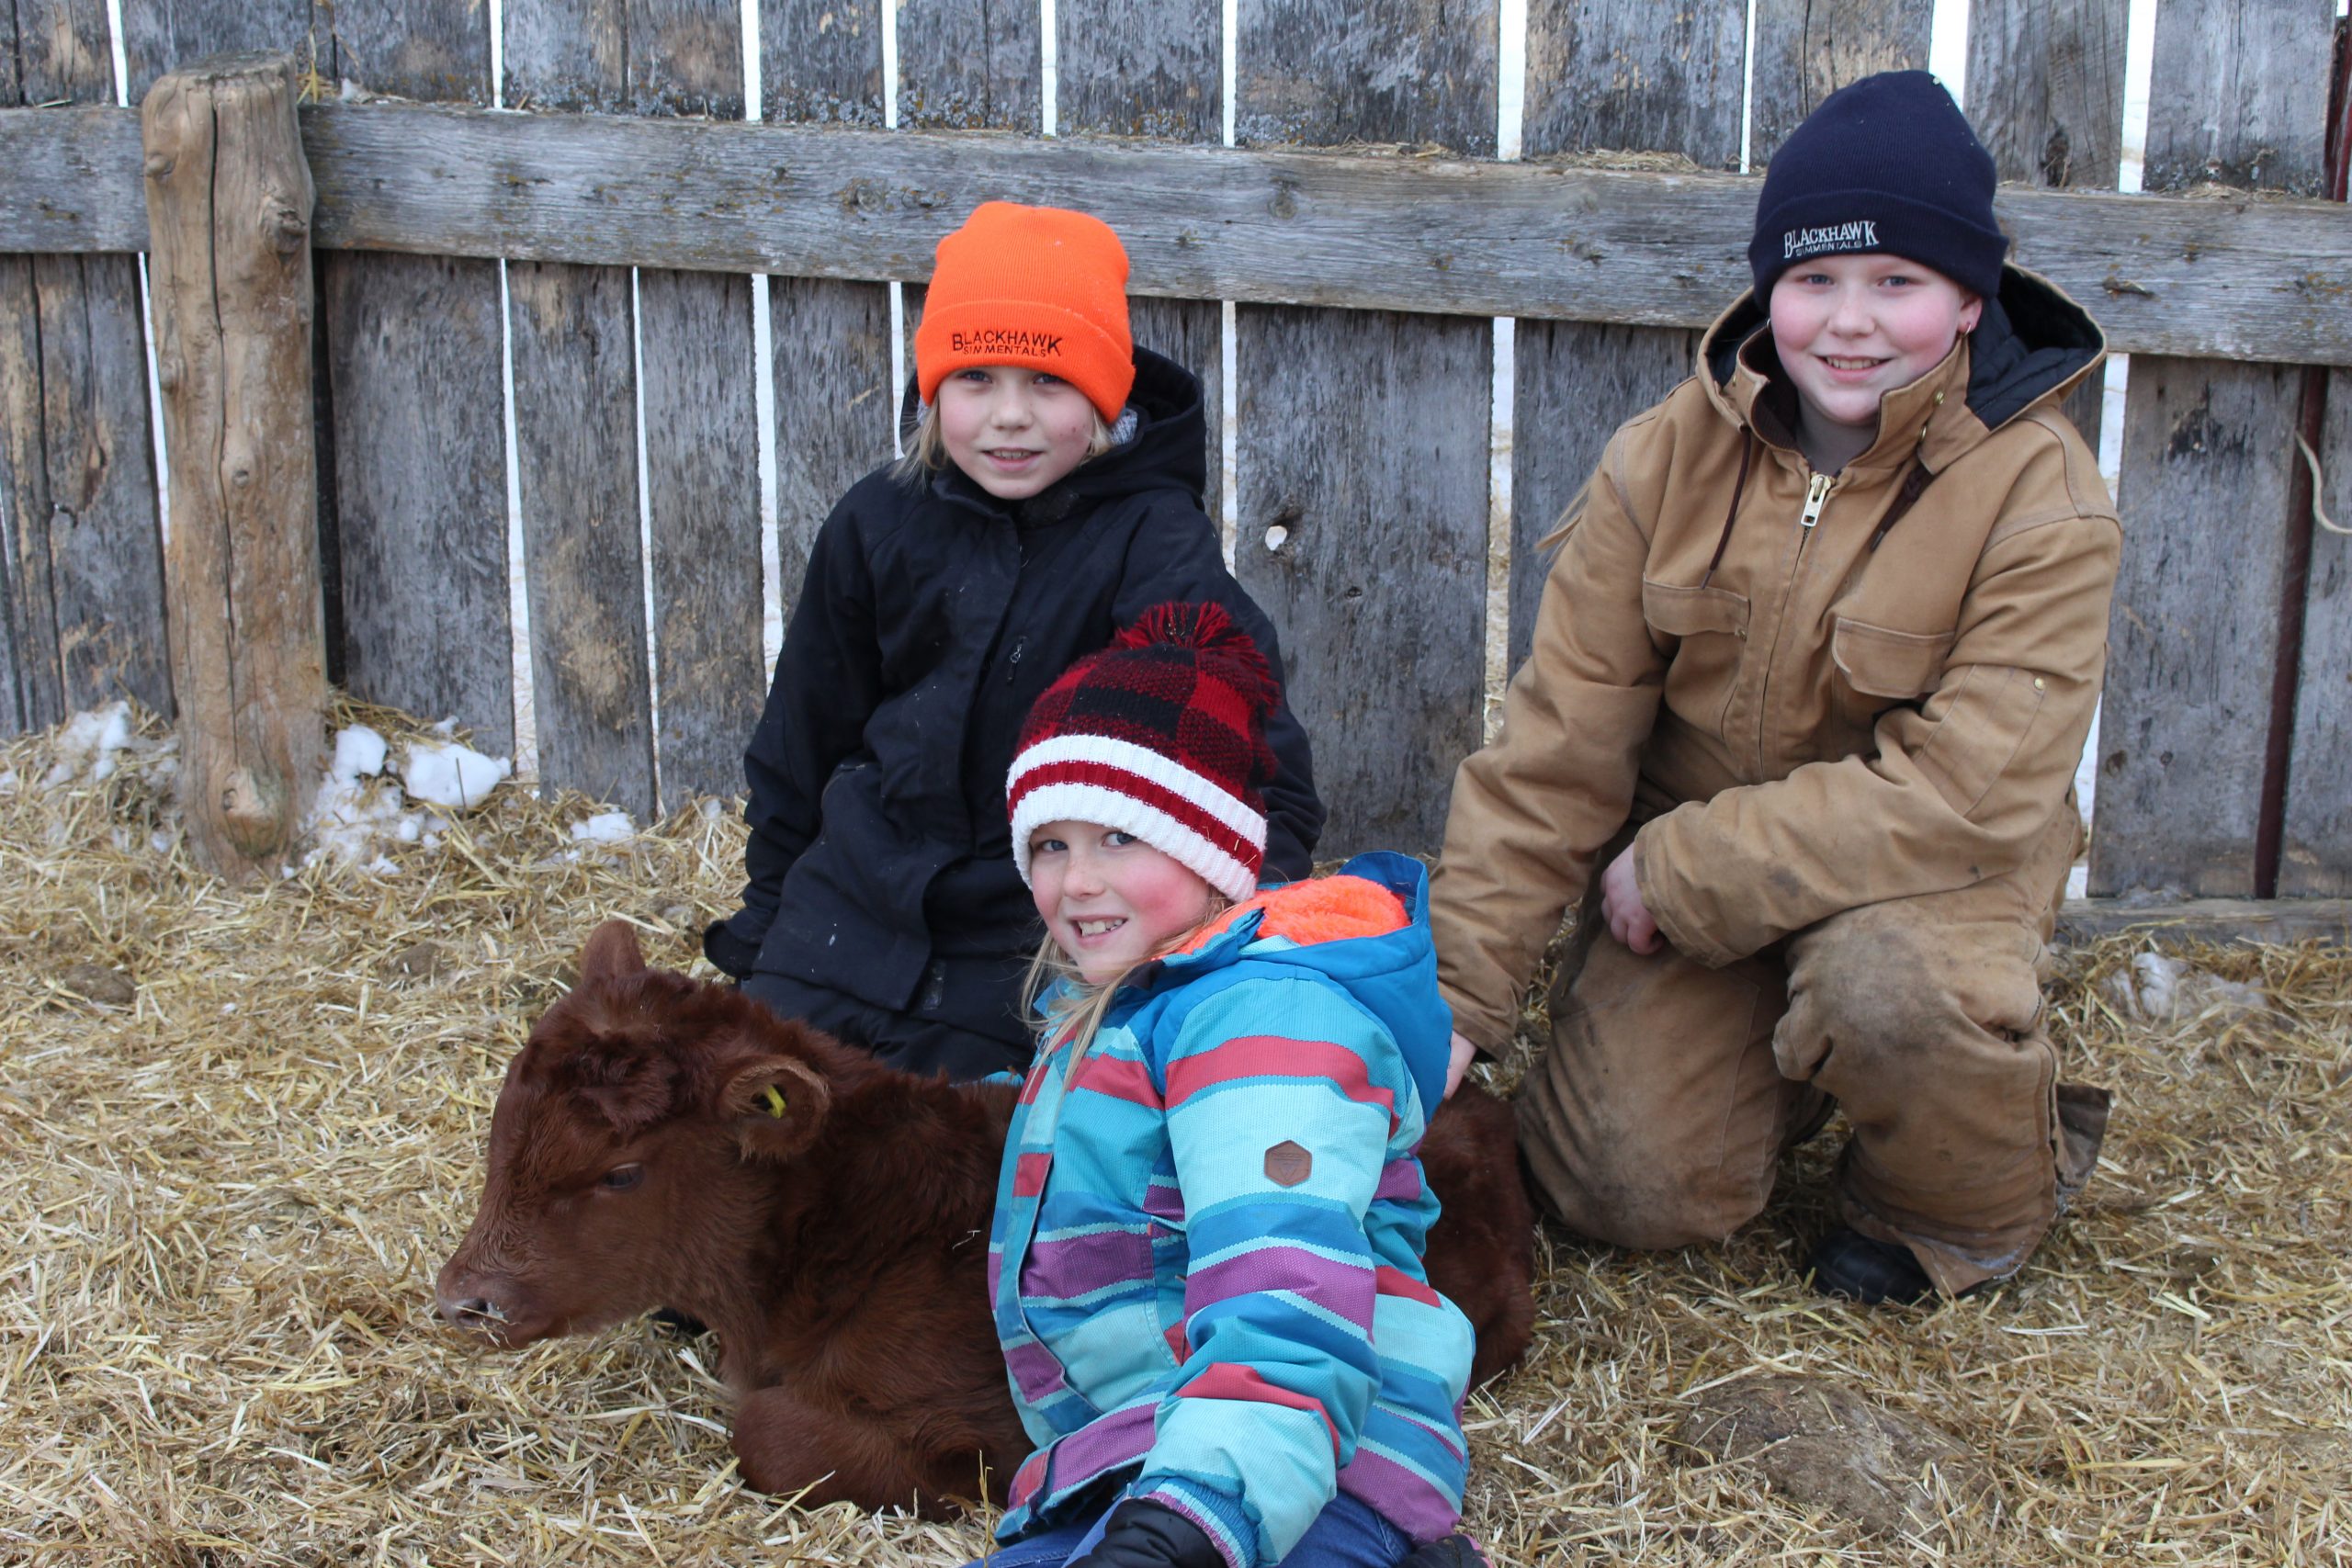 A new generation of calves welcomed at Teeple farm